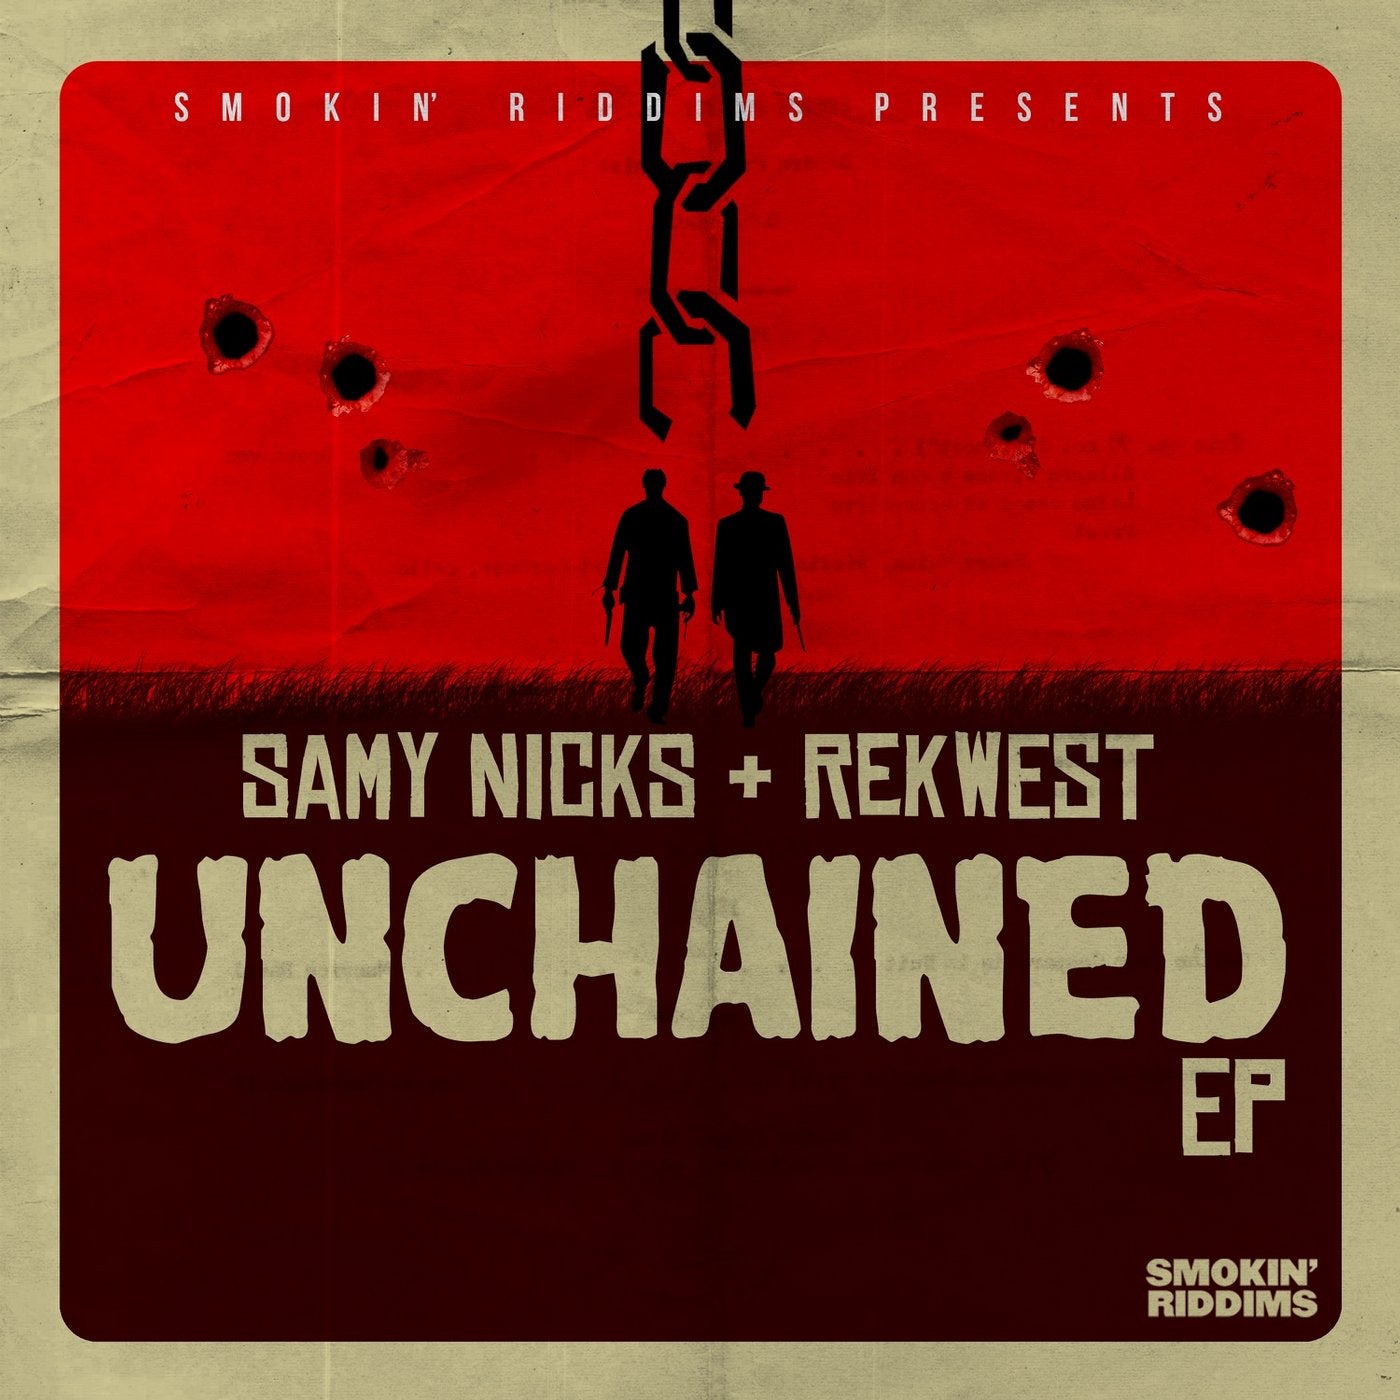 Unchained EP